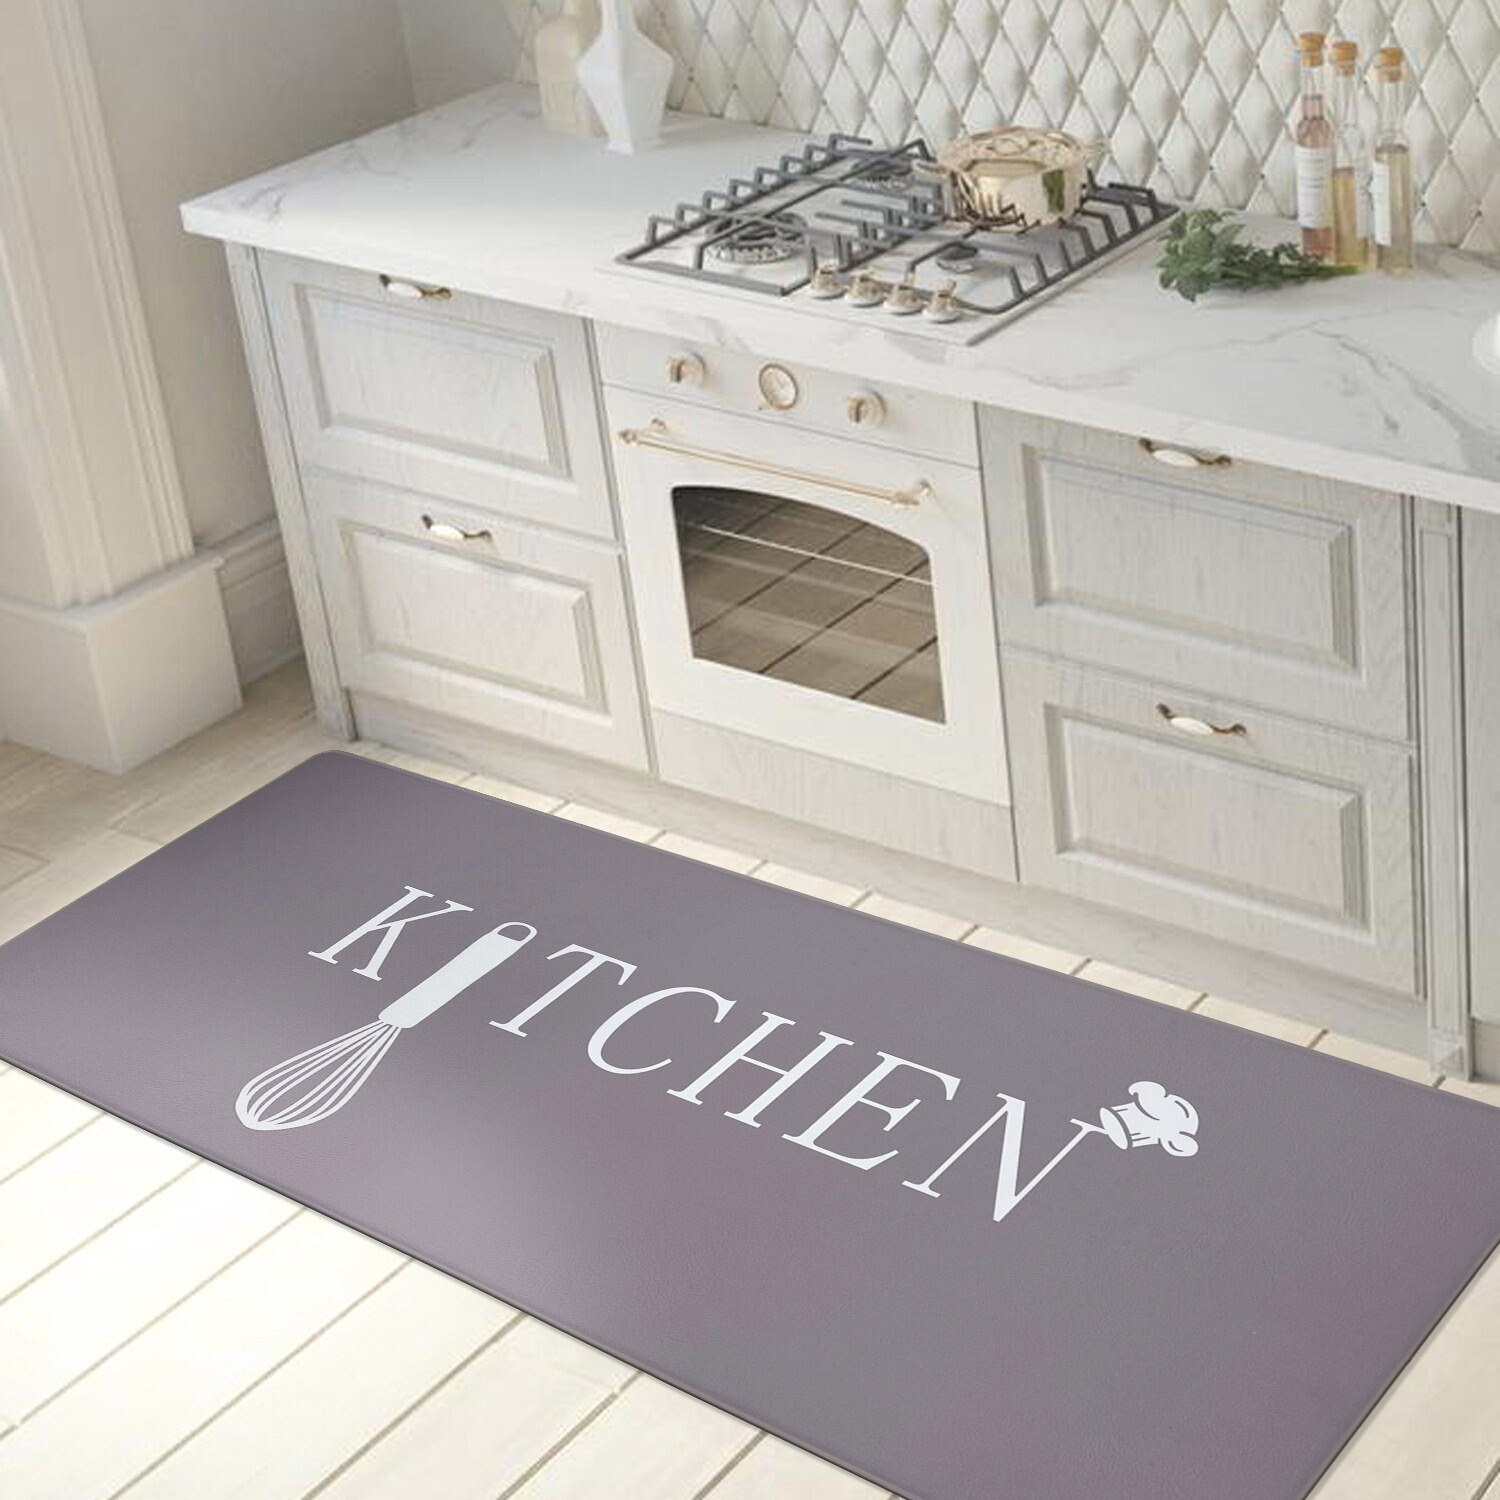 https://ak1.ostkcdn.com/images/products/is/images/direct/7471fc01137074dd87f80aacc1d491657985cd87/Kitchen-Anti-Fatigue-Standing-Mat.jpg